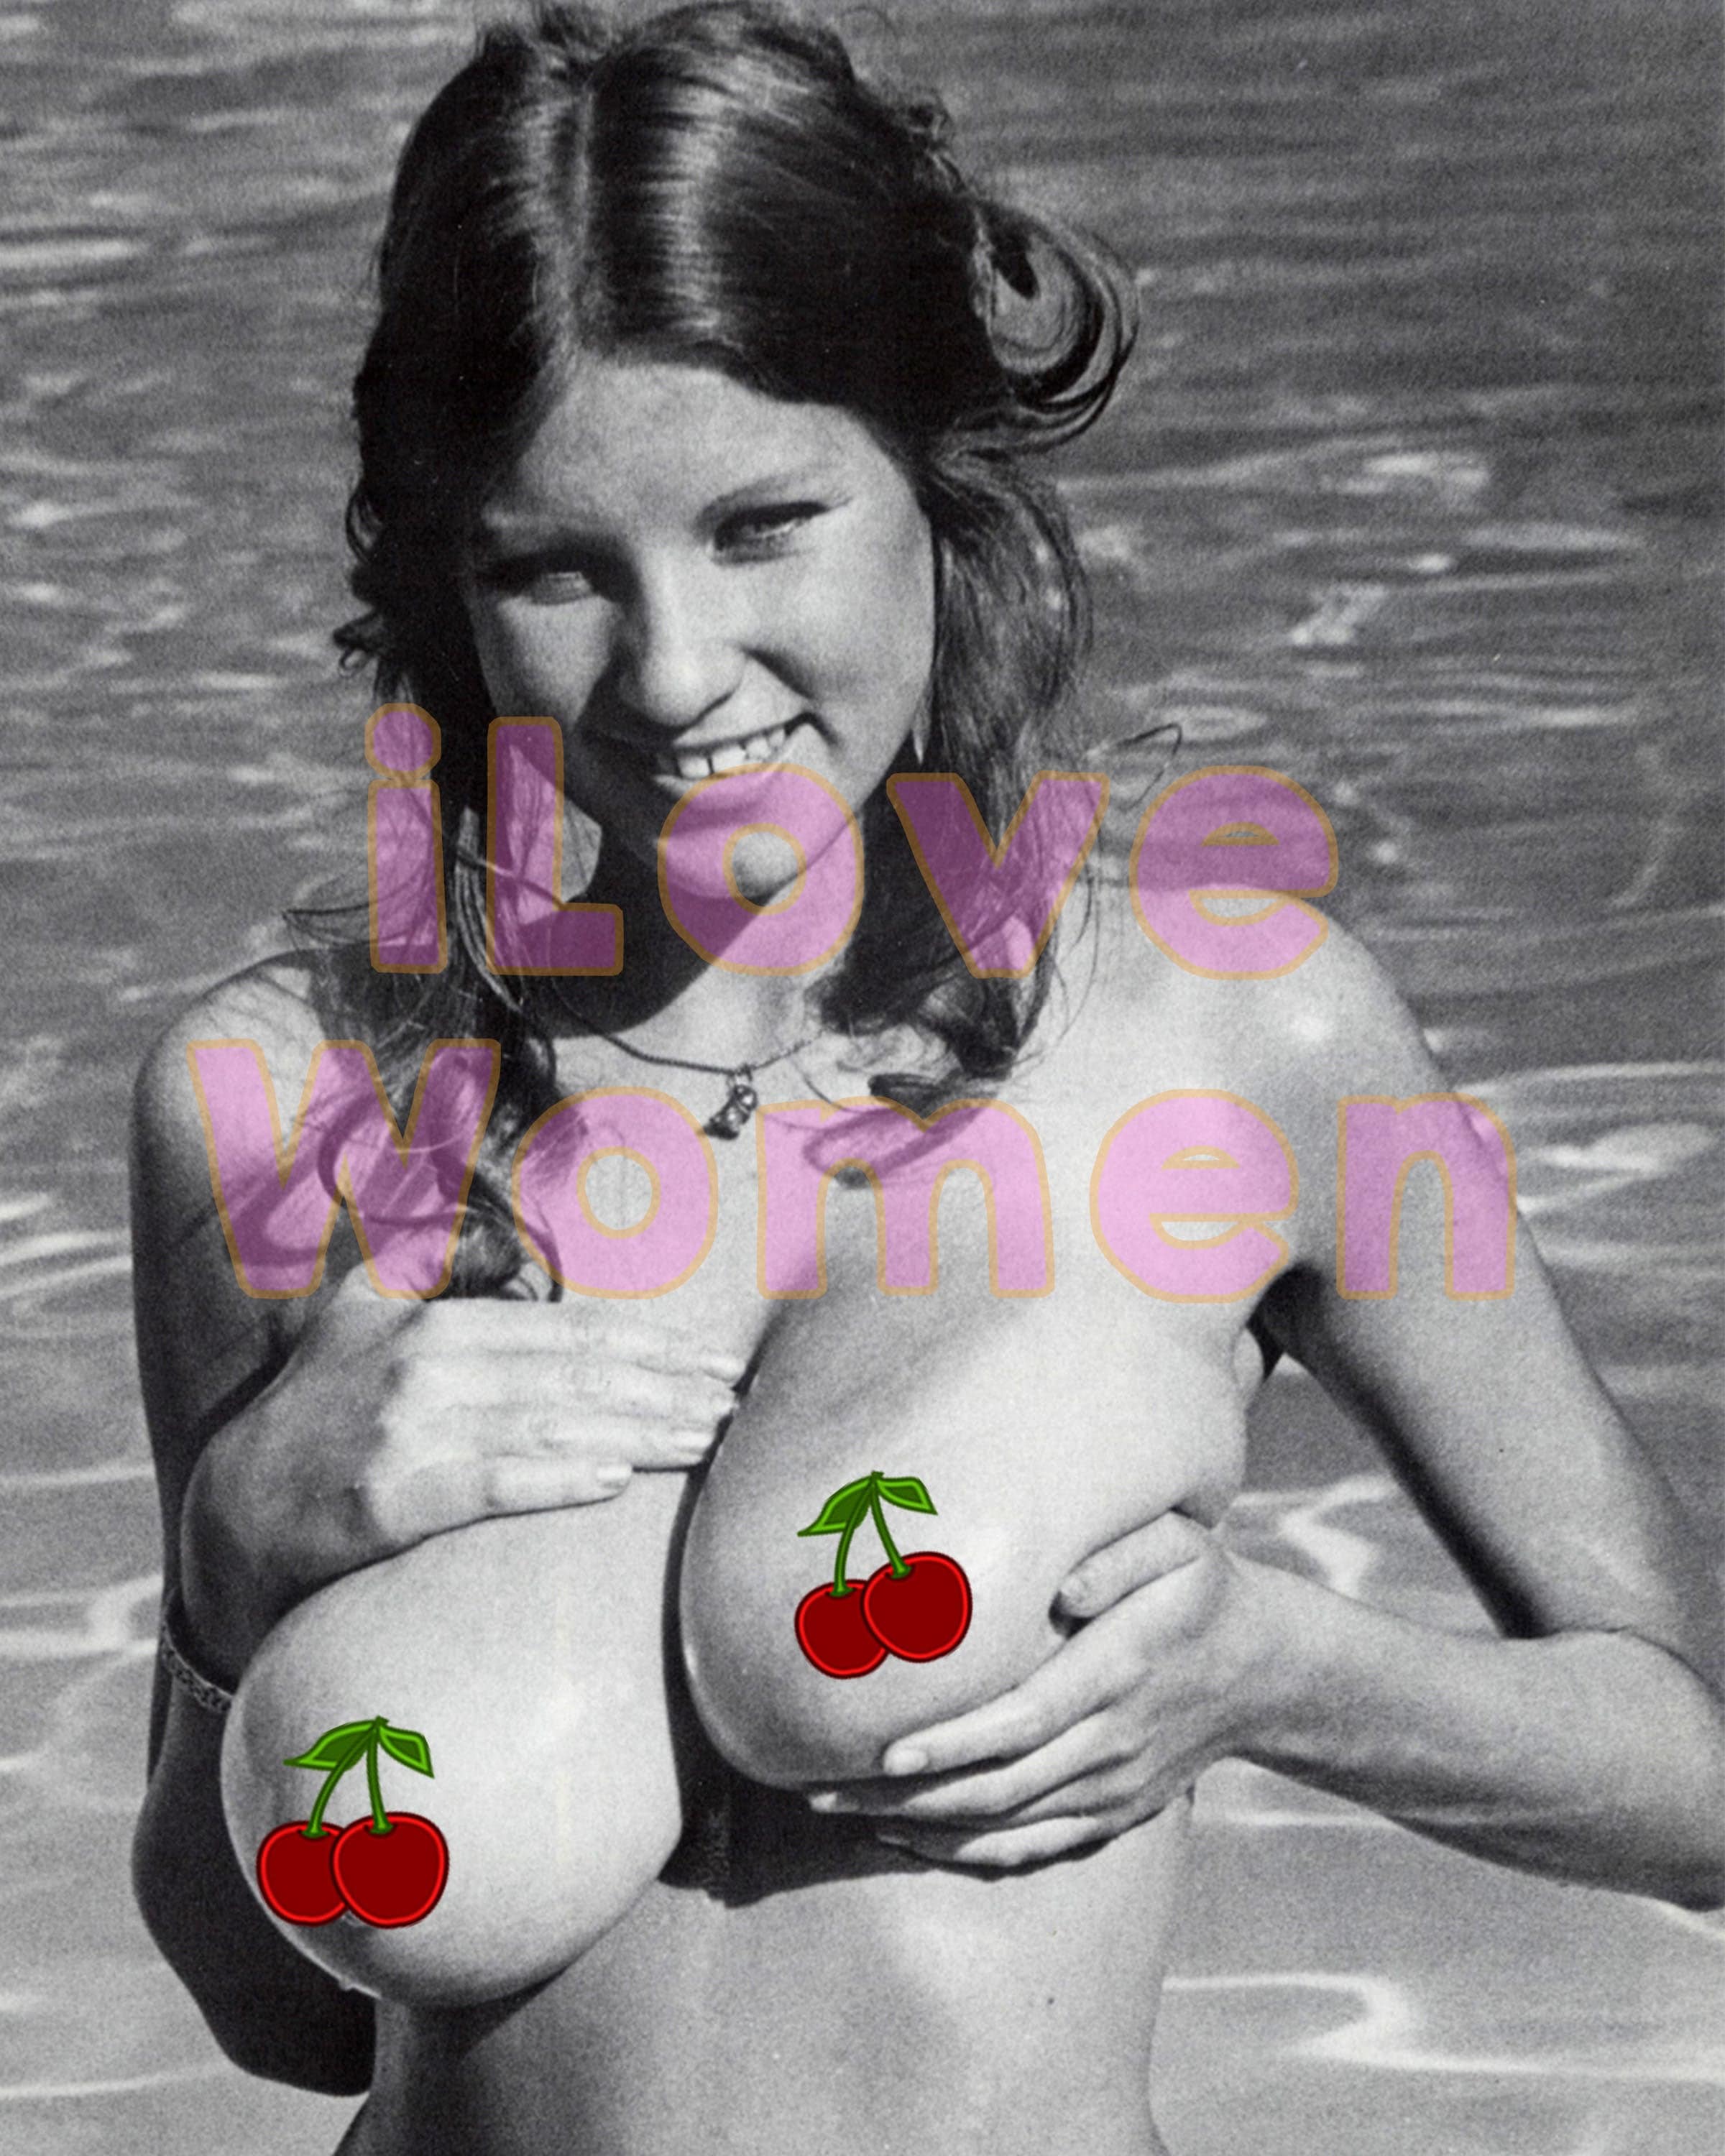 Sexy Girls With Big Boobs - 1960's Vintage Nude Photo Sexy Big Titty Girl-huge Boobs - Etsy